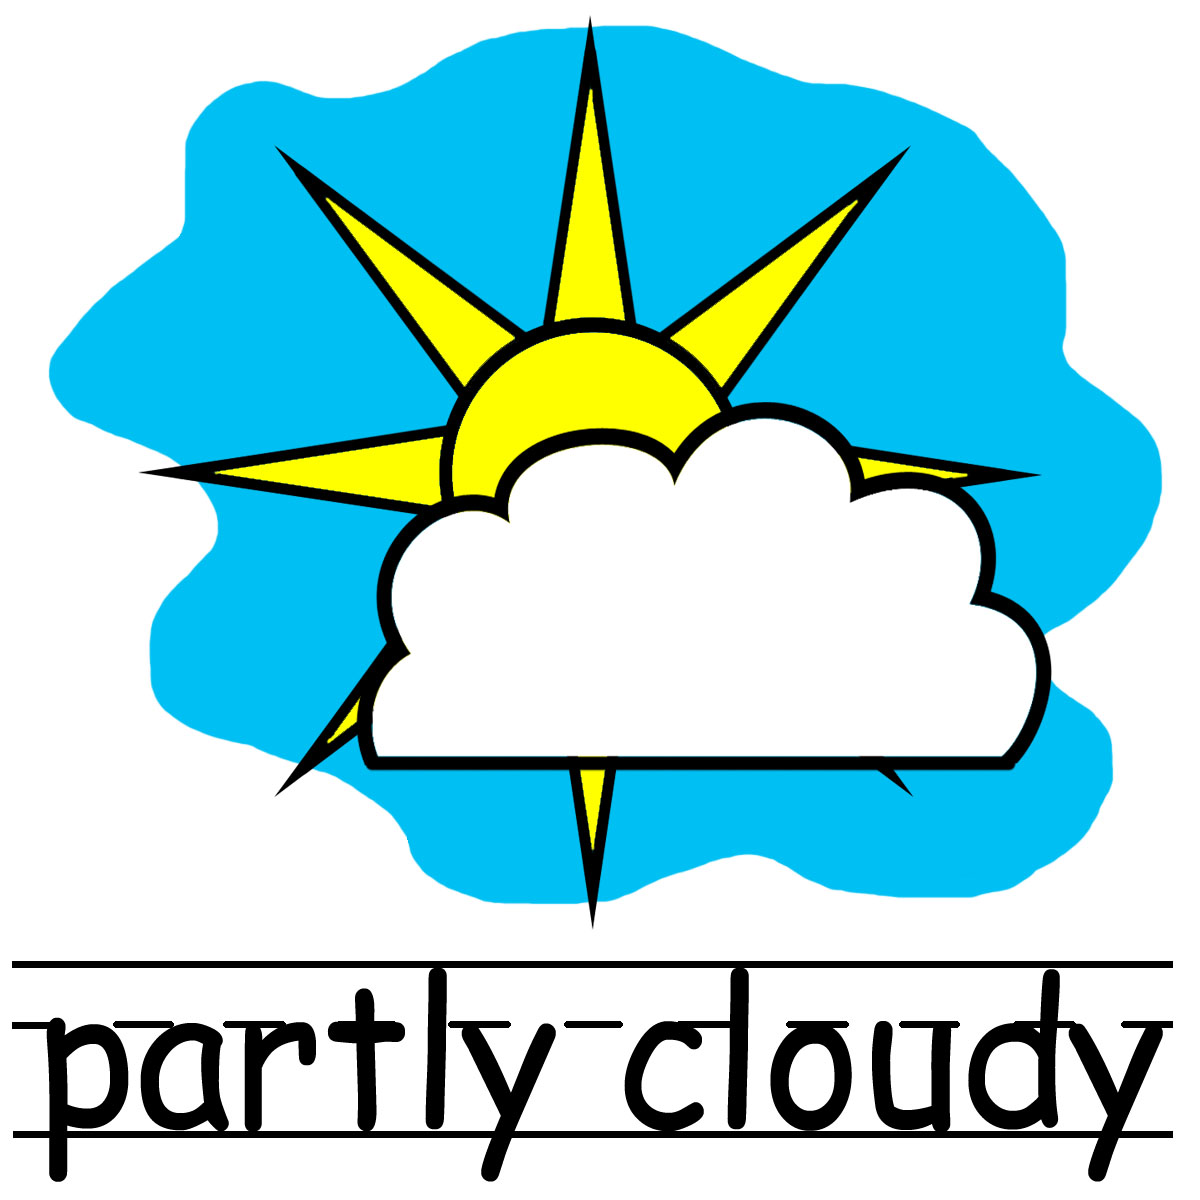 Windy day clipart 2